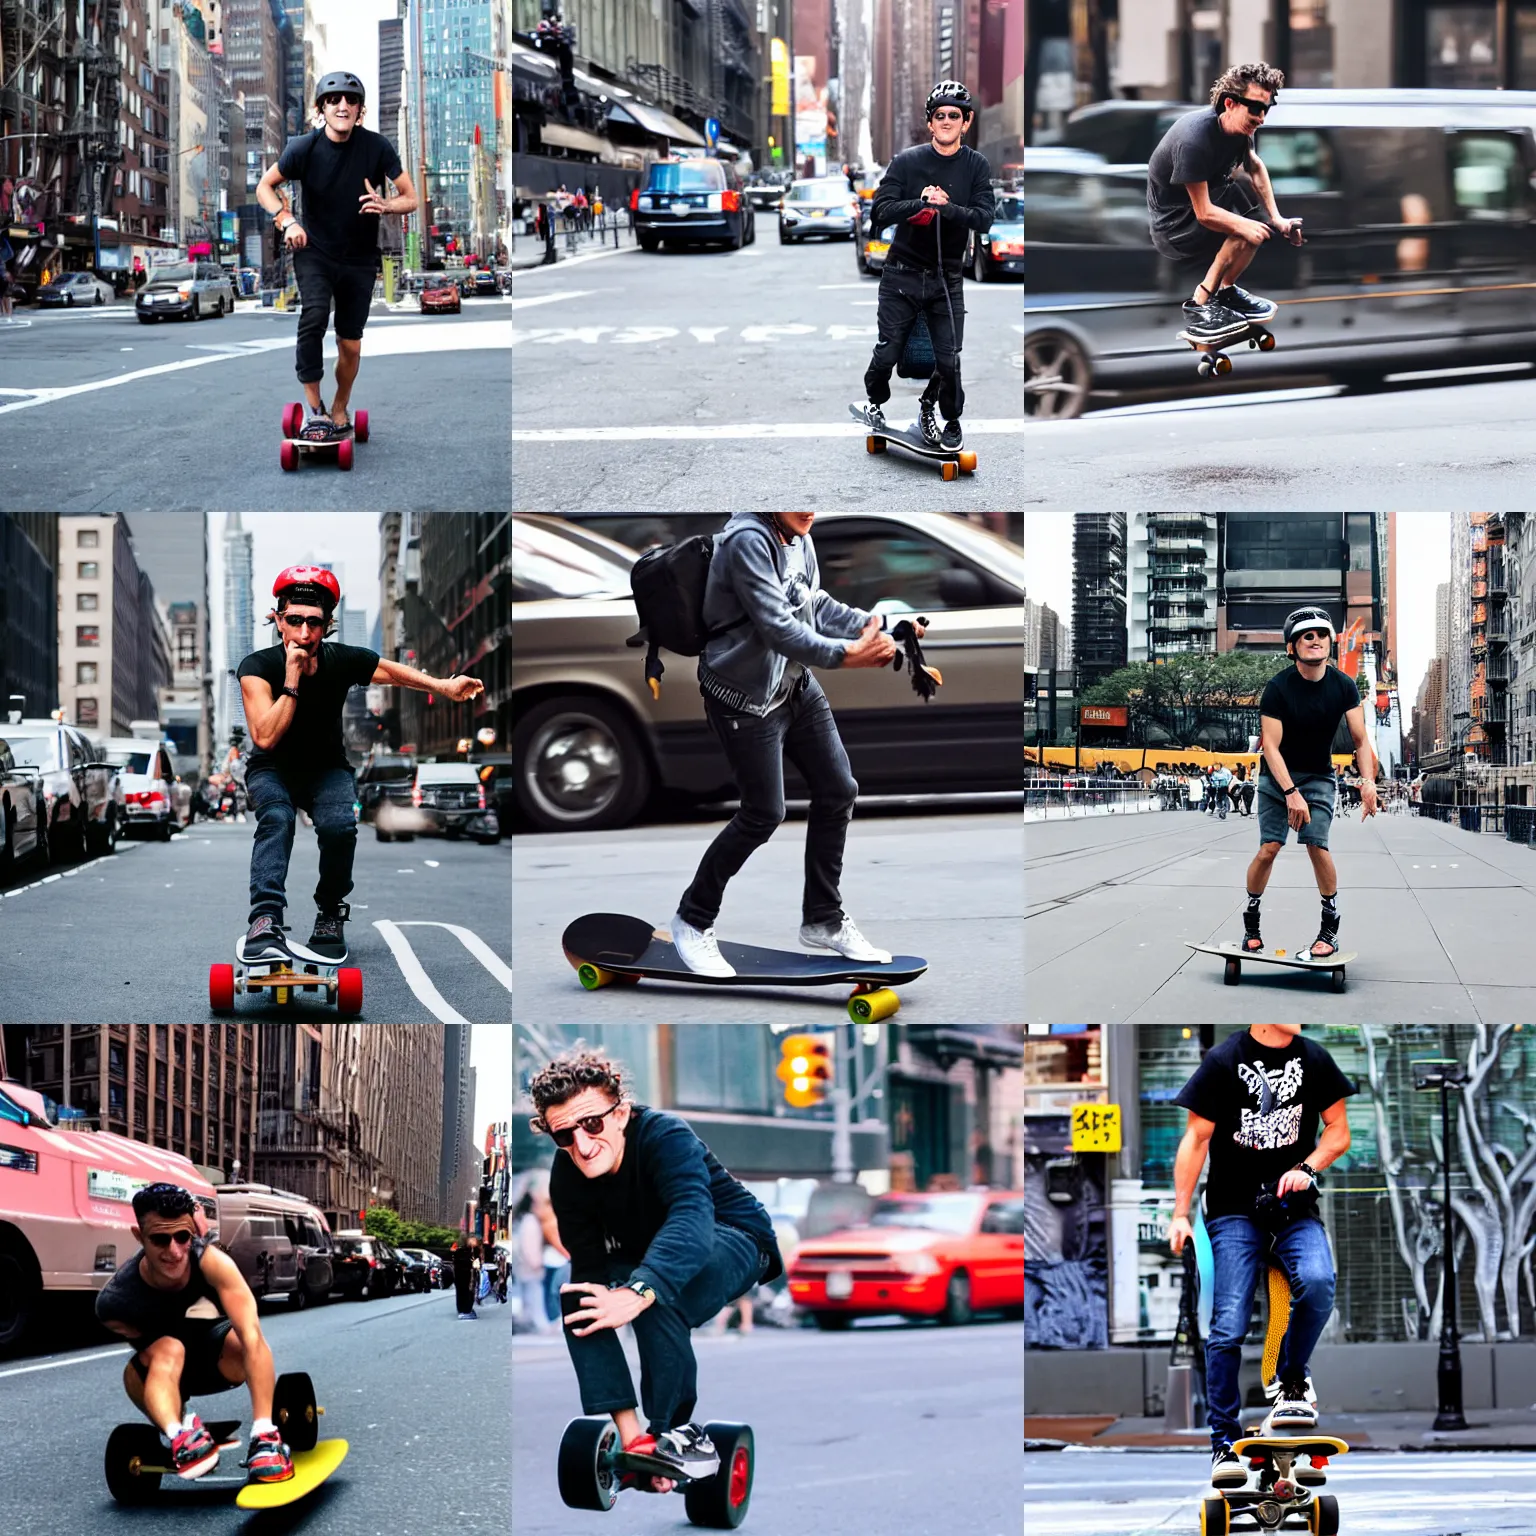 casey neistat riding skateboard in new york city | Stable Diffusion ...